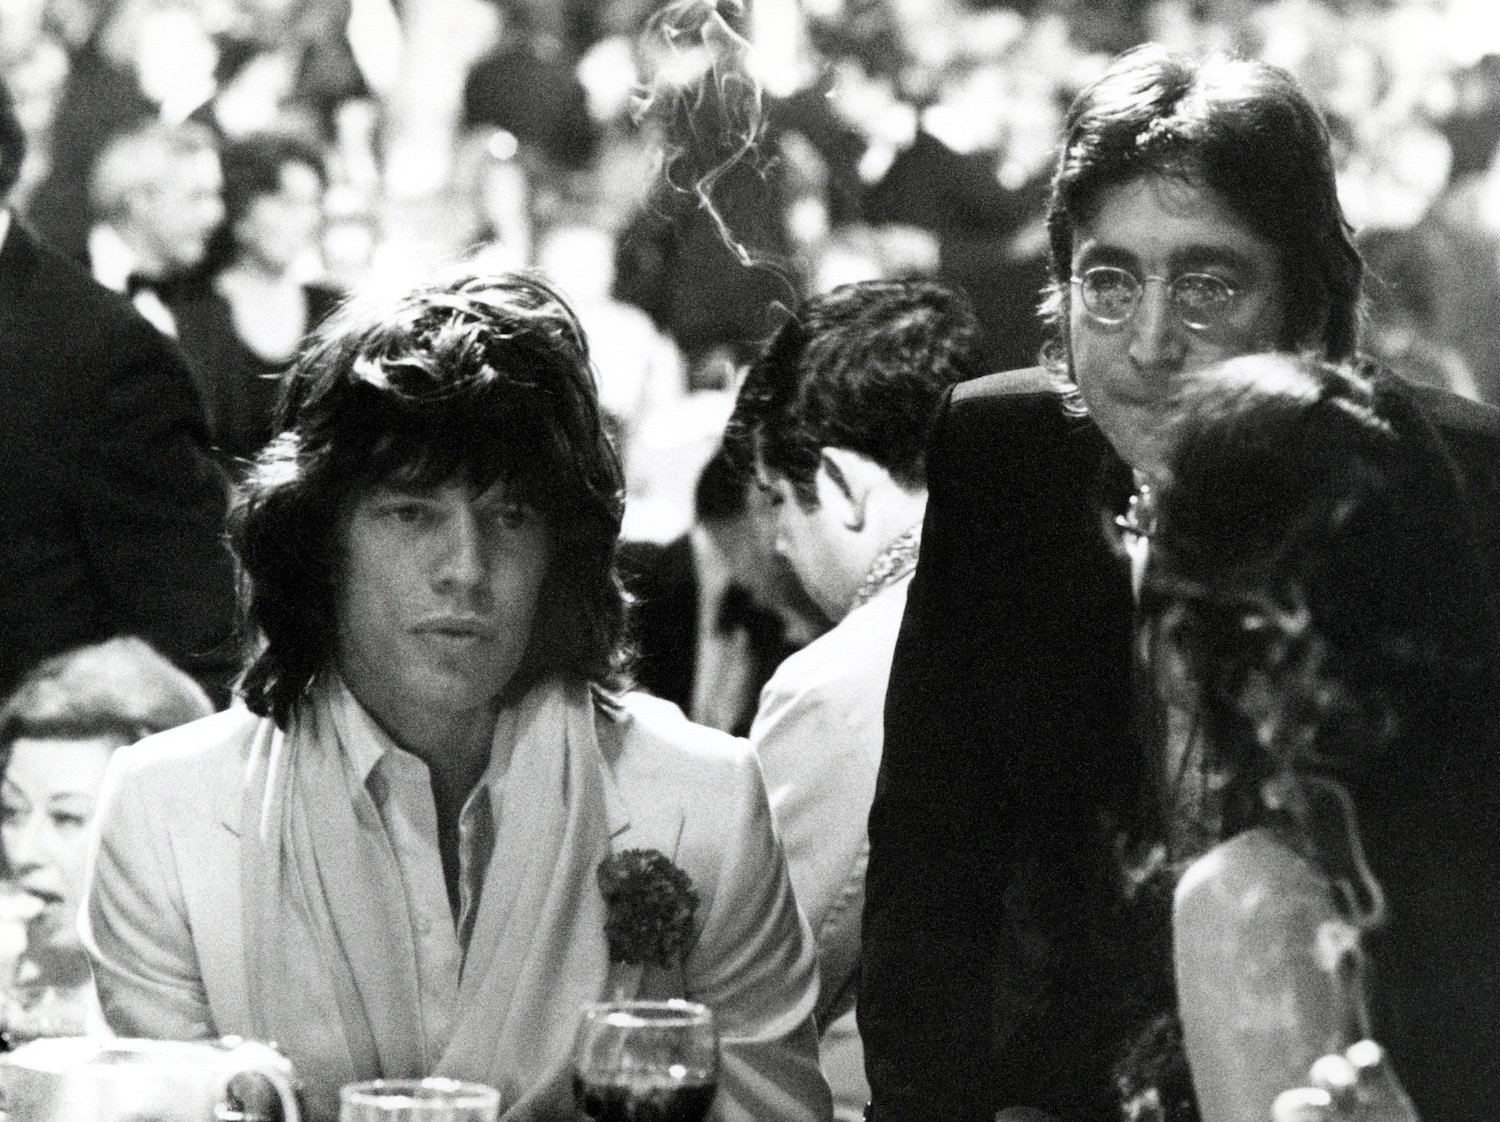 Mick Jagger, John Lennon, and May Pang attend the AFI salute to James Cagney